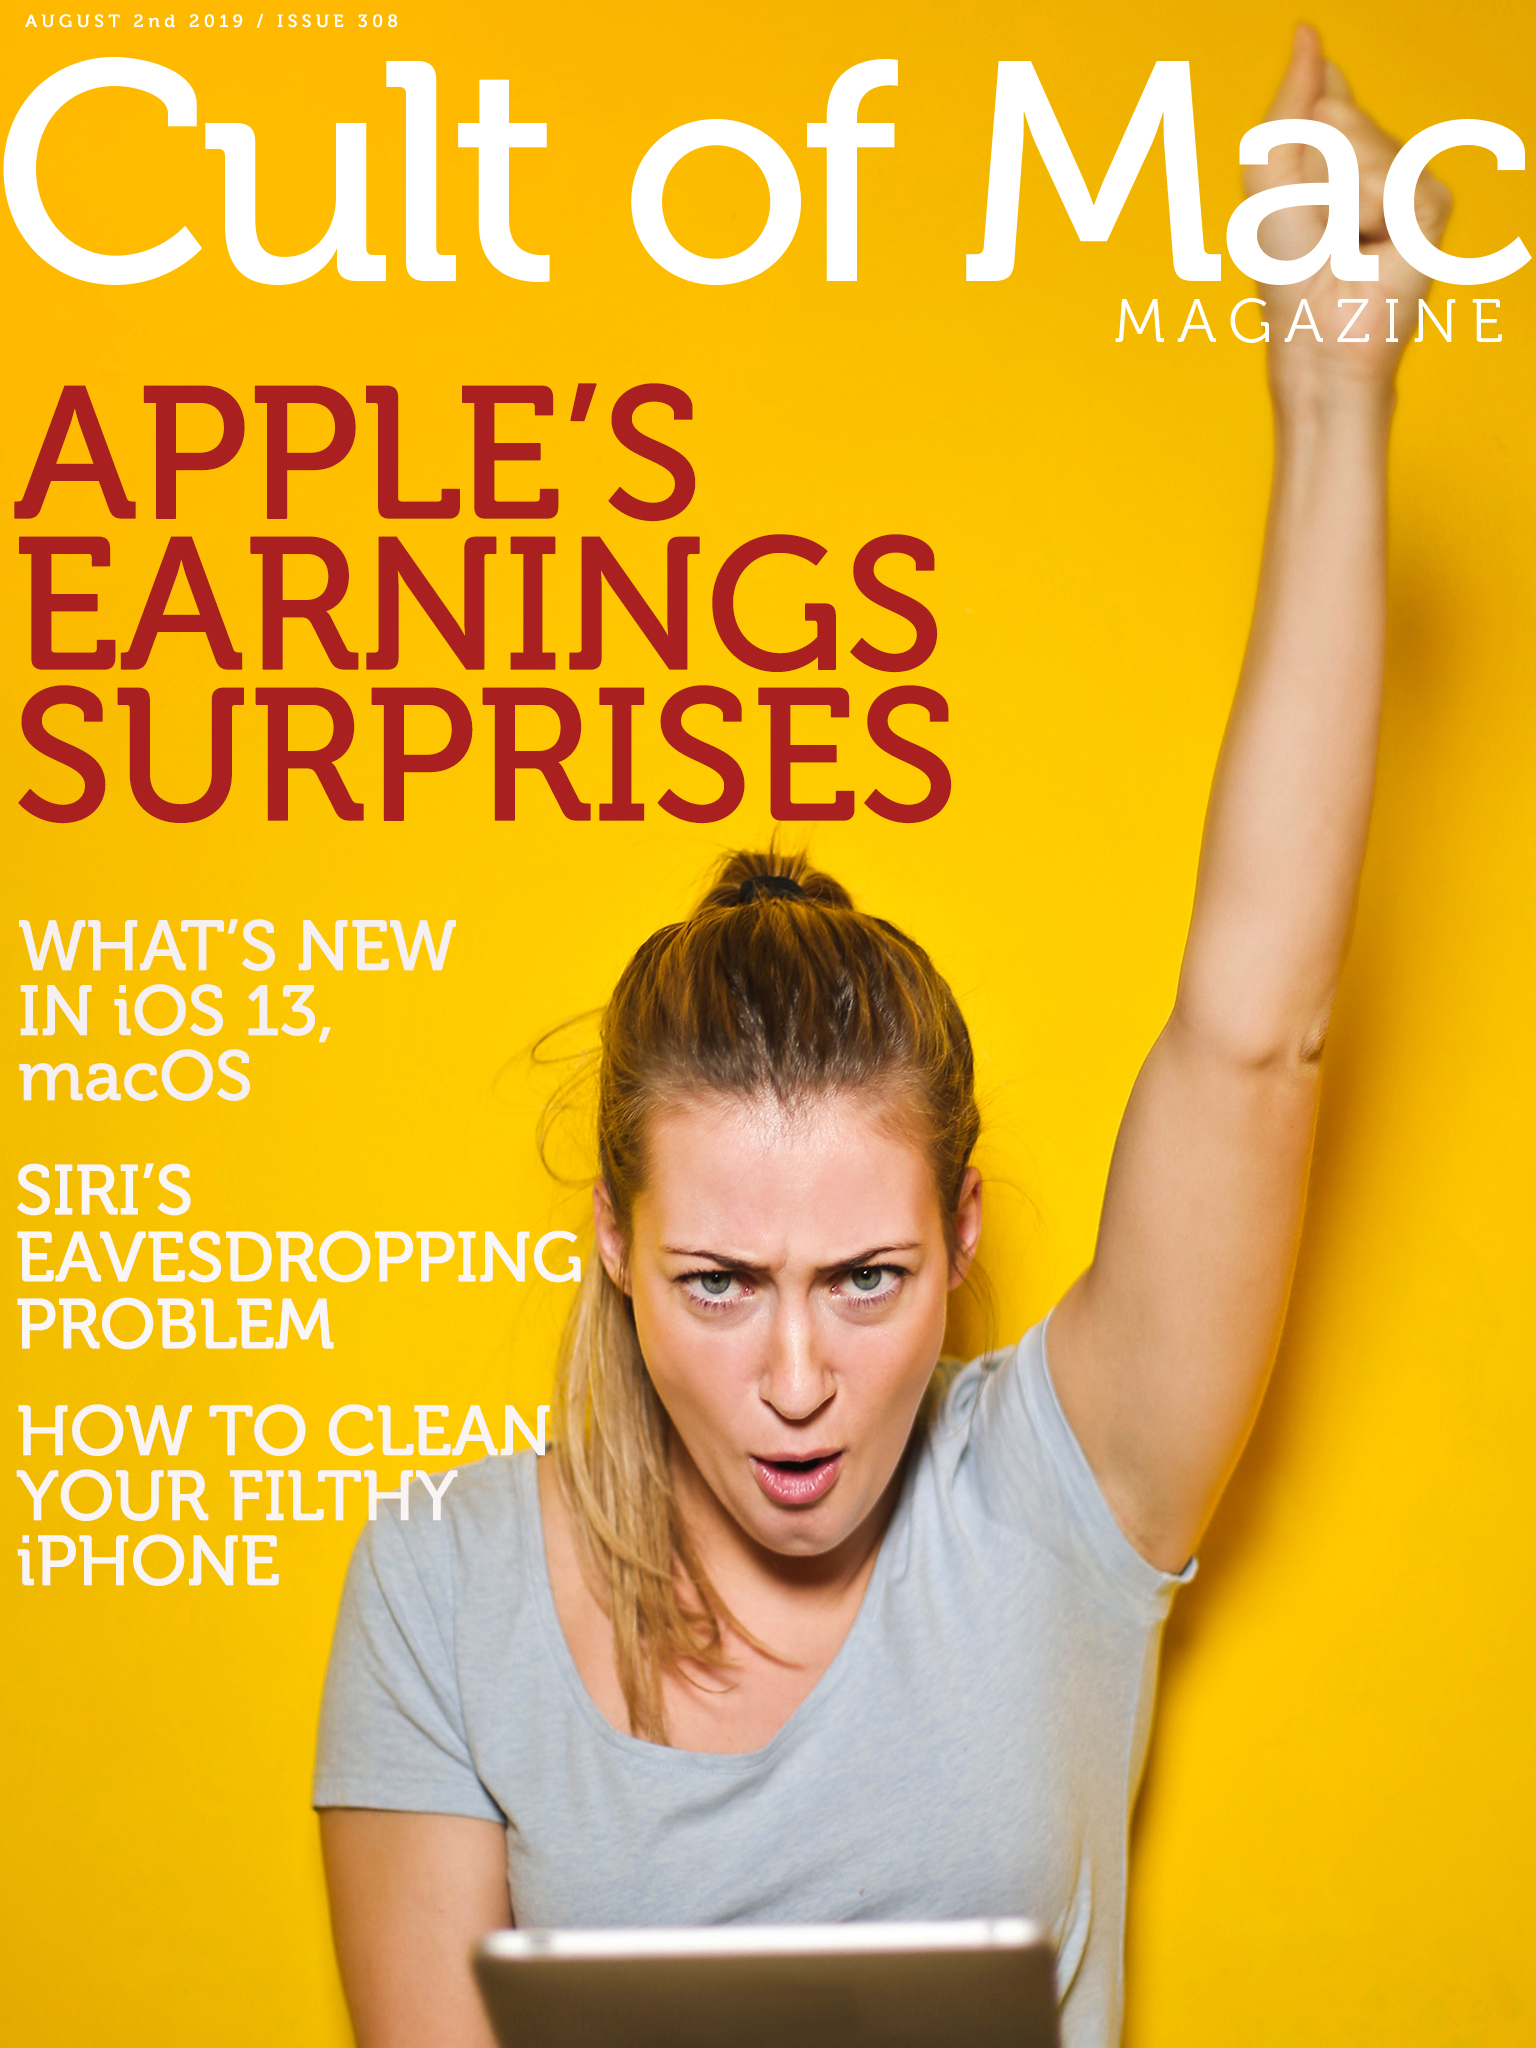 Find out about Apple's big earnings surprises in Cult of Mac Magazine No. 308